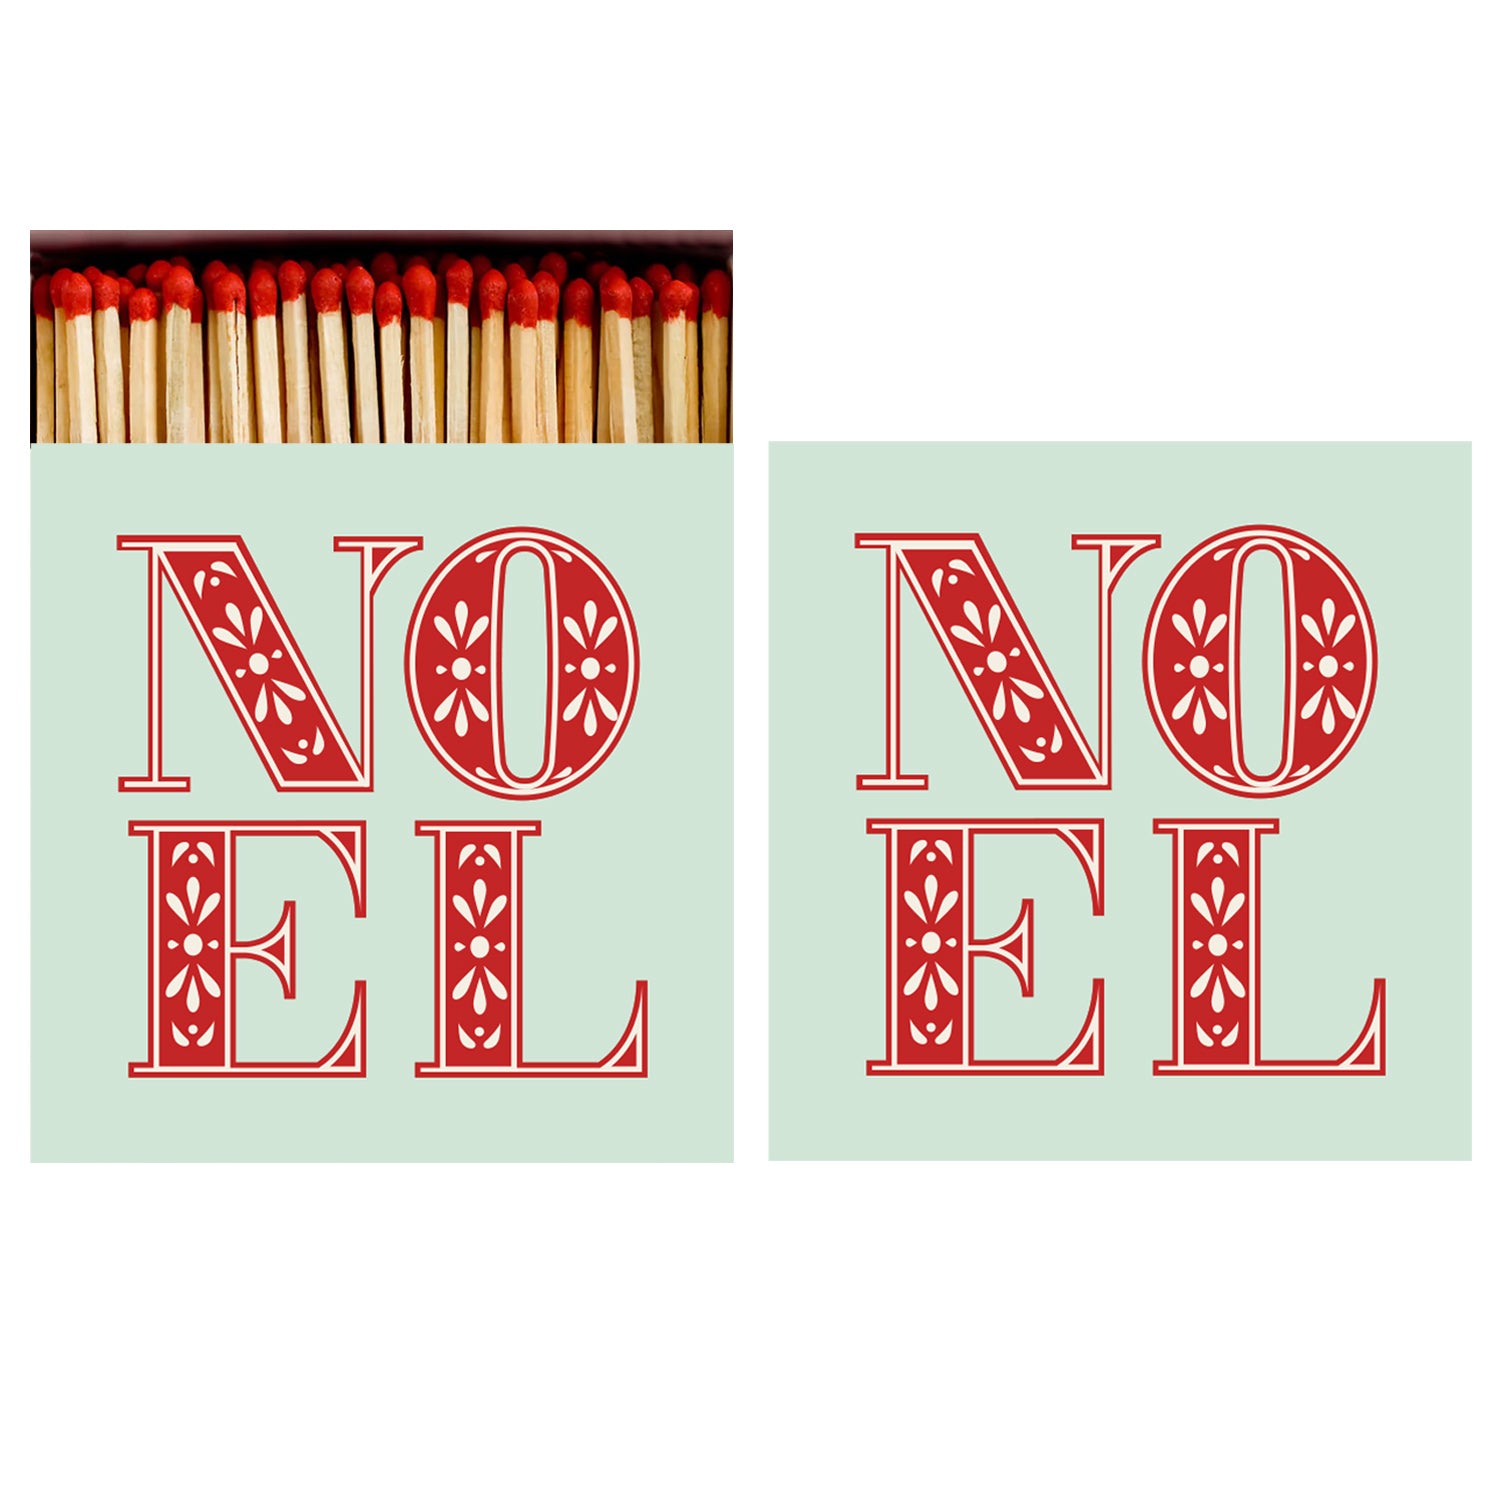 Two identical sides of a square match box, depicting &quot;NOEL&quot; in ornate red letters stacked in two rows on a mint green background, the left of which is open slightly to reveal the matches inside.